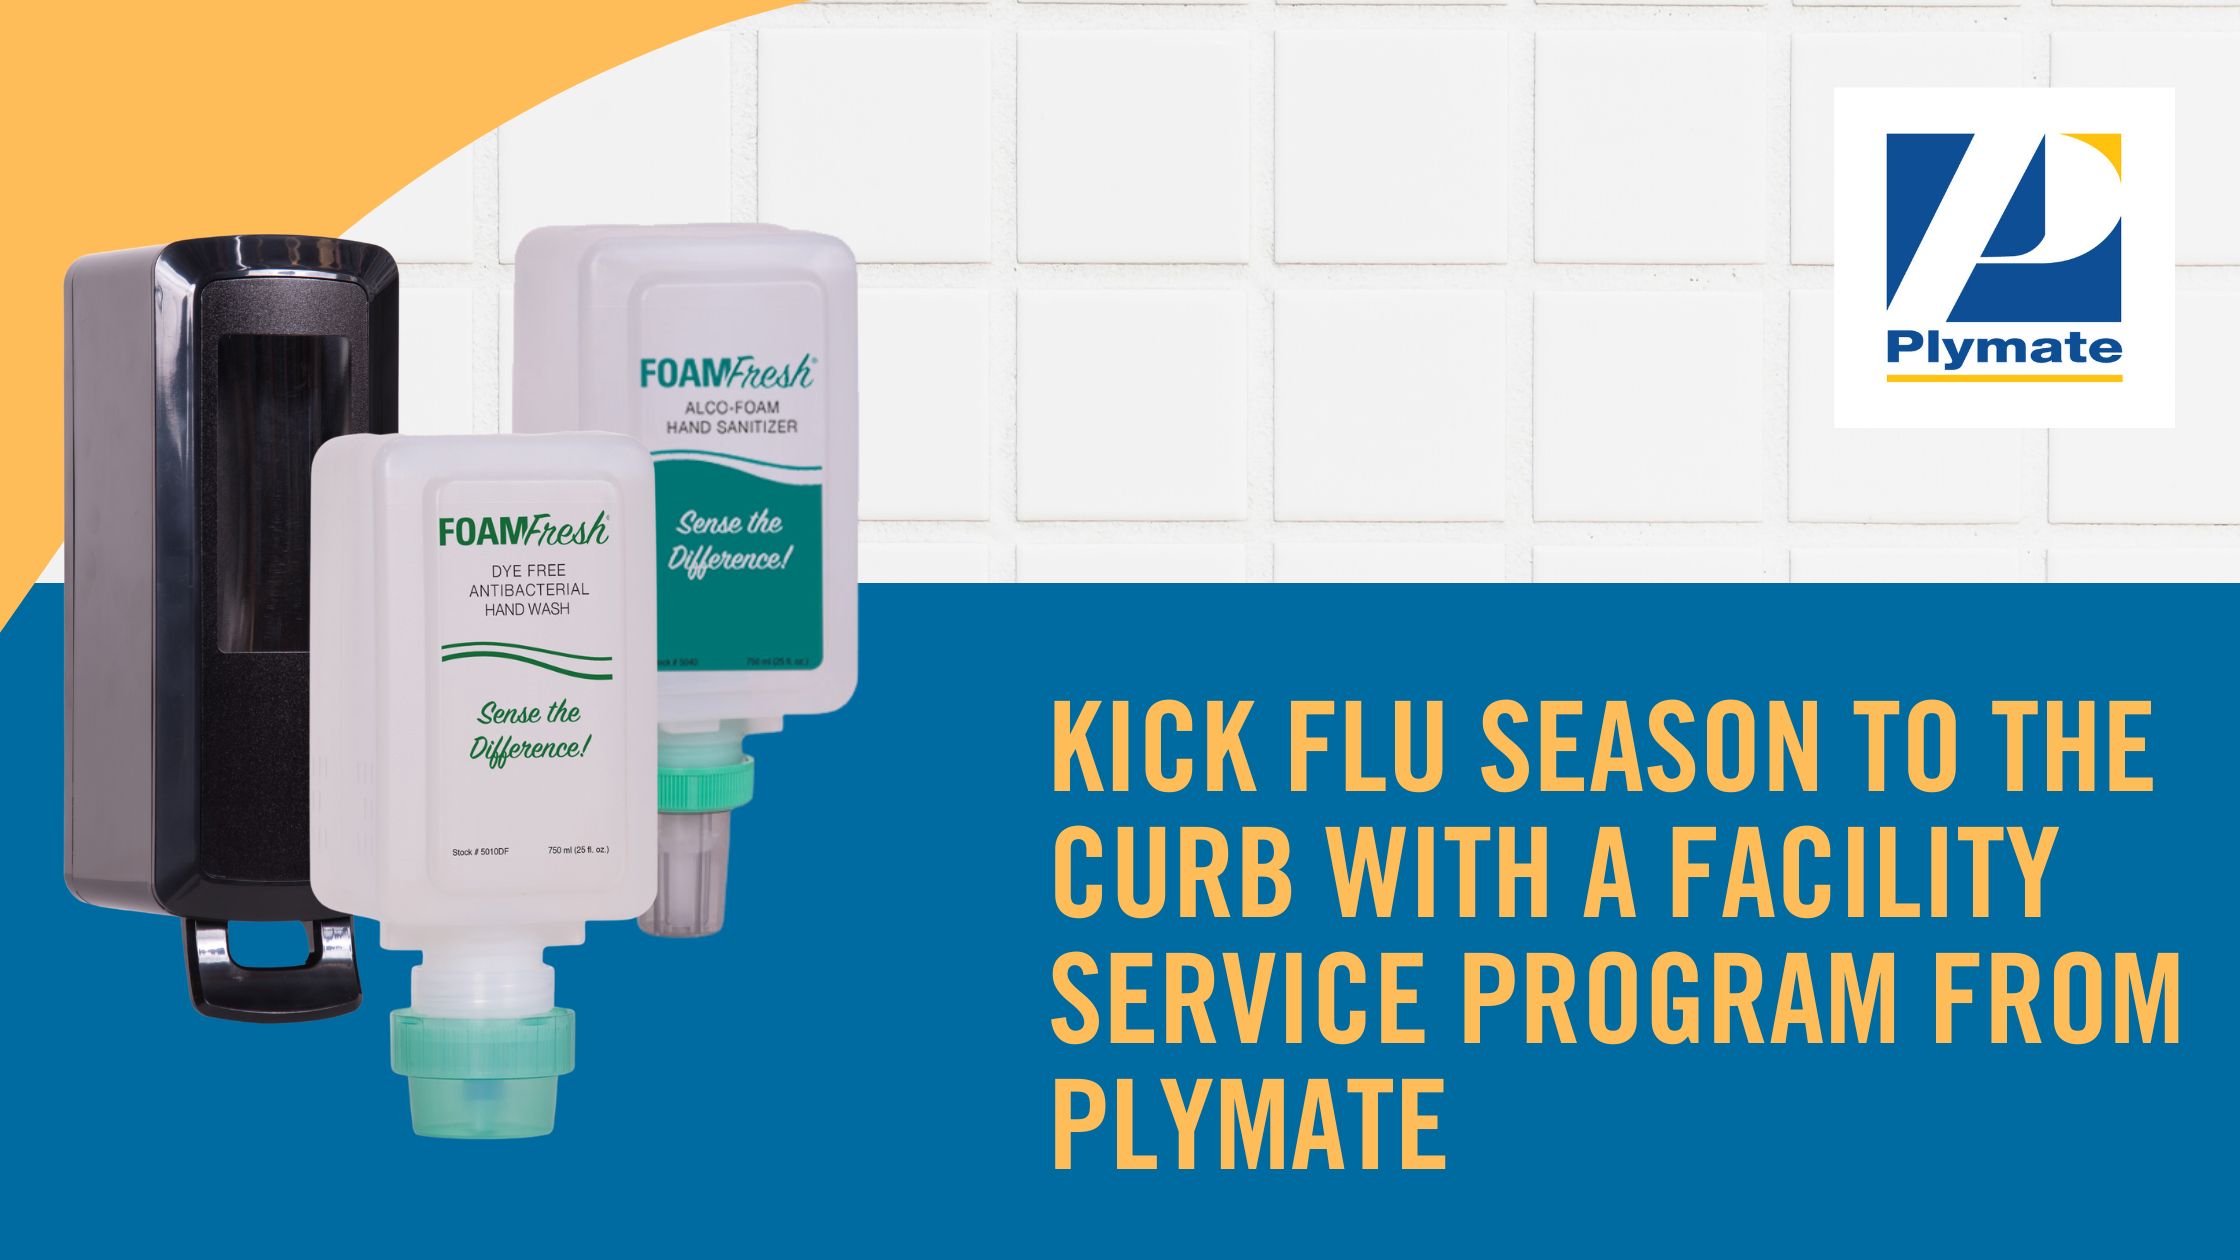 Kick cold and flu season to the curb with a facility service program from Plymate